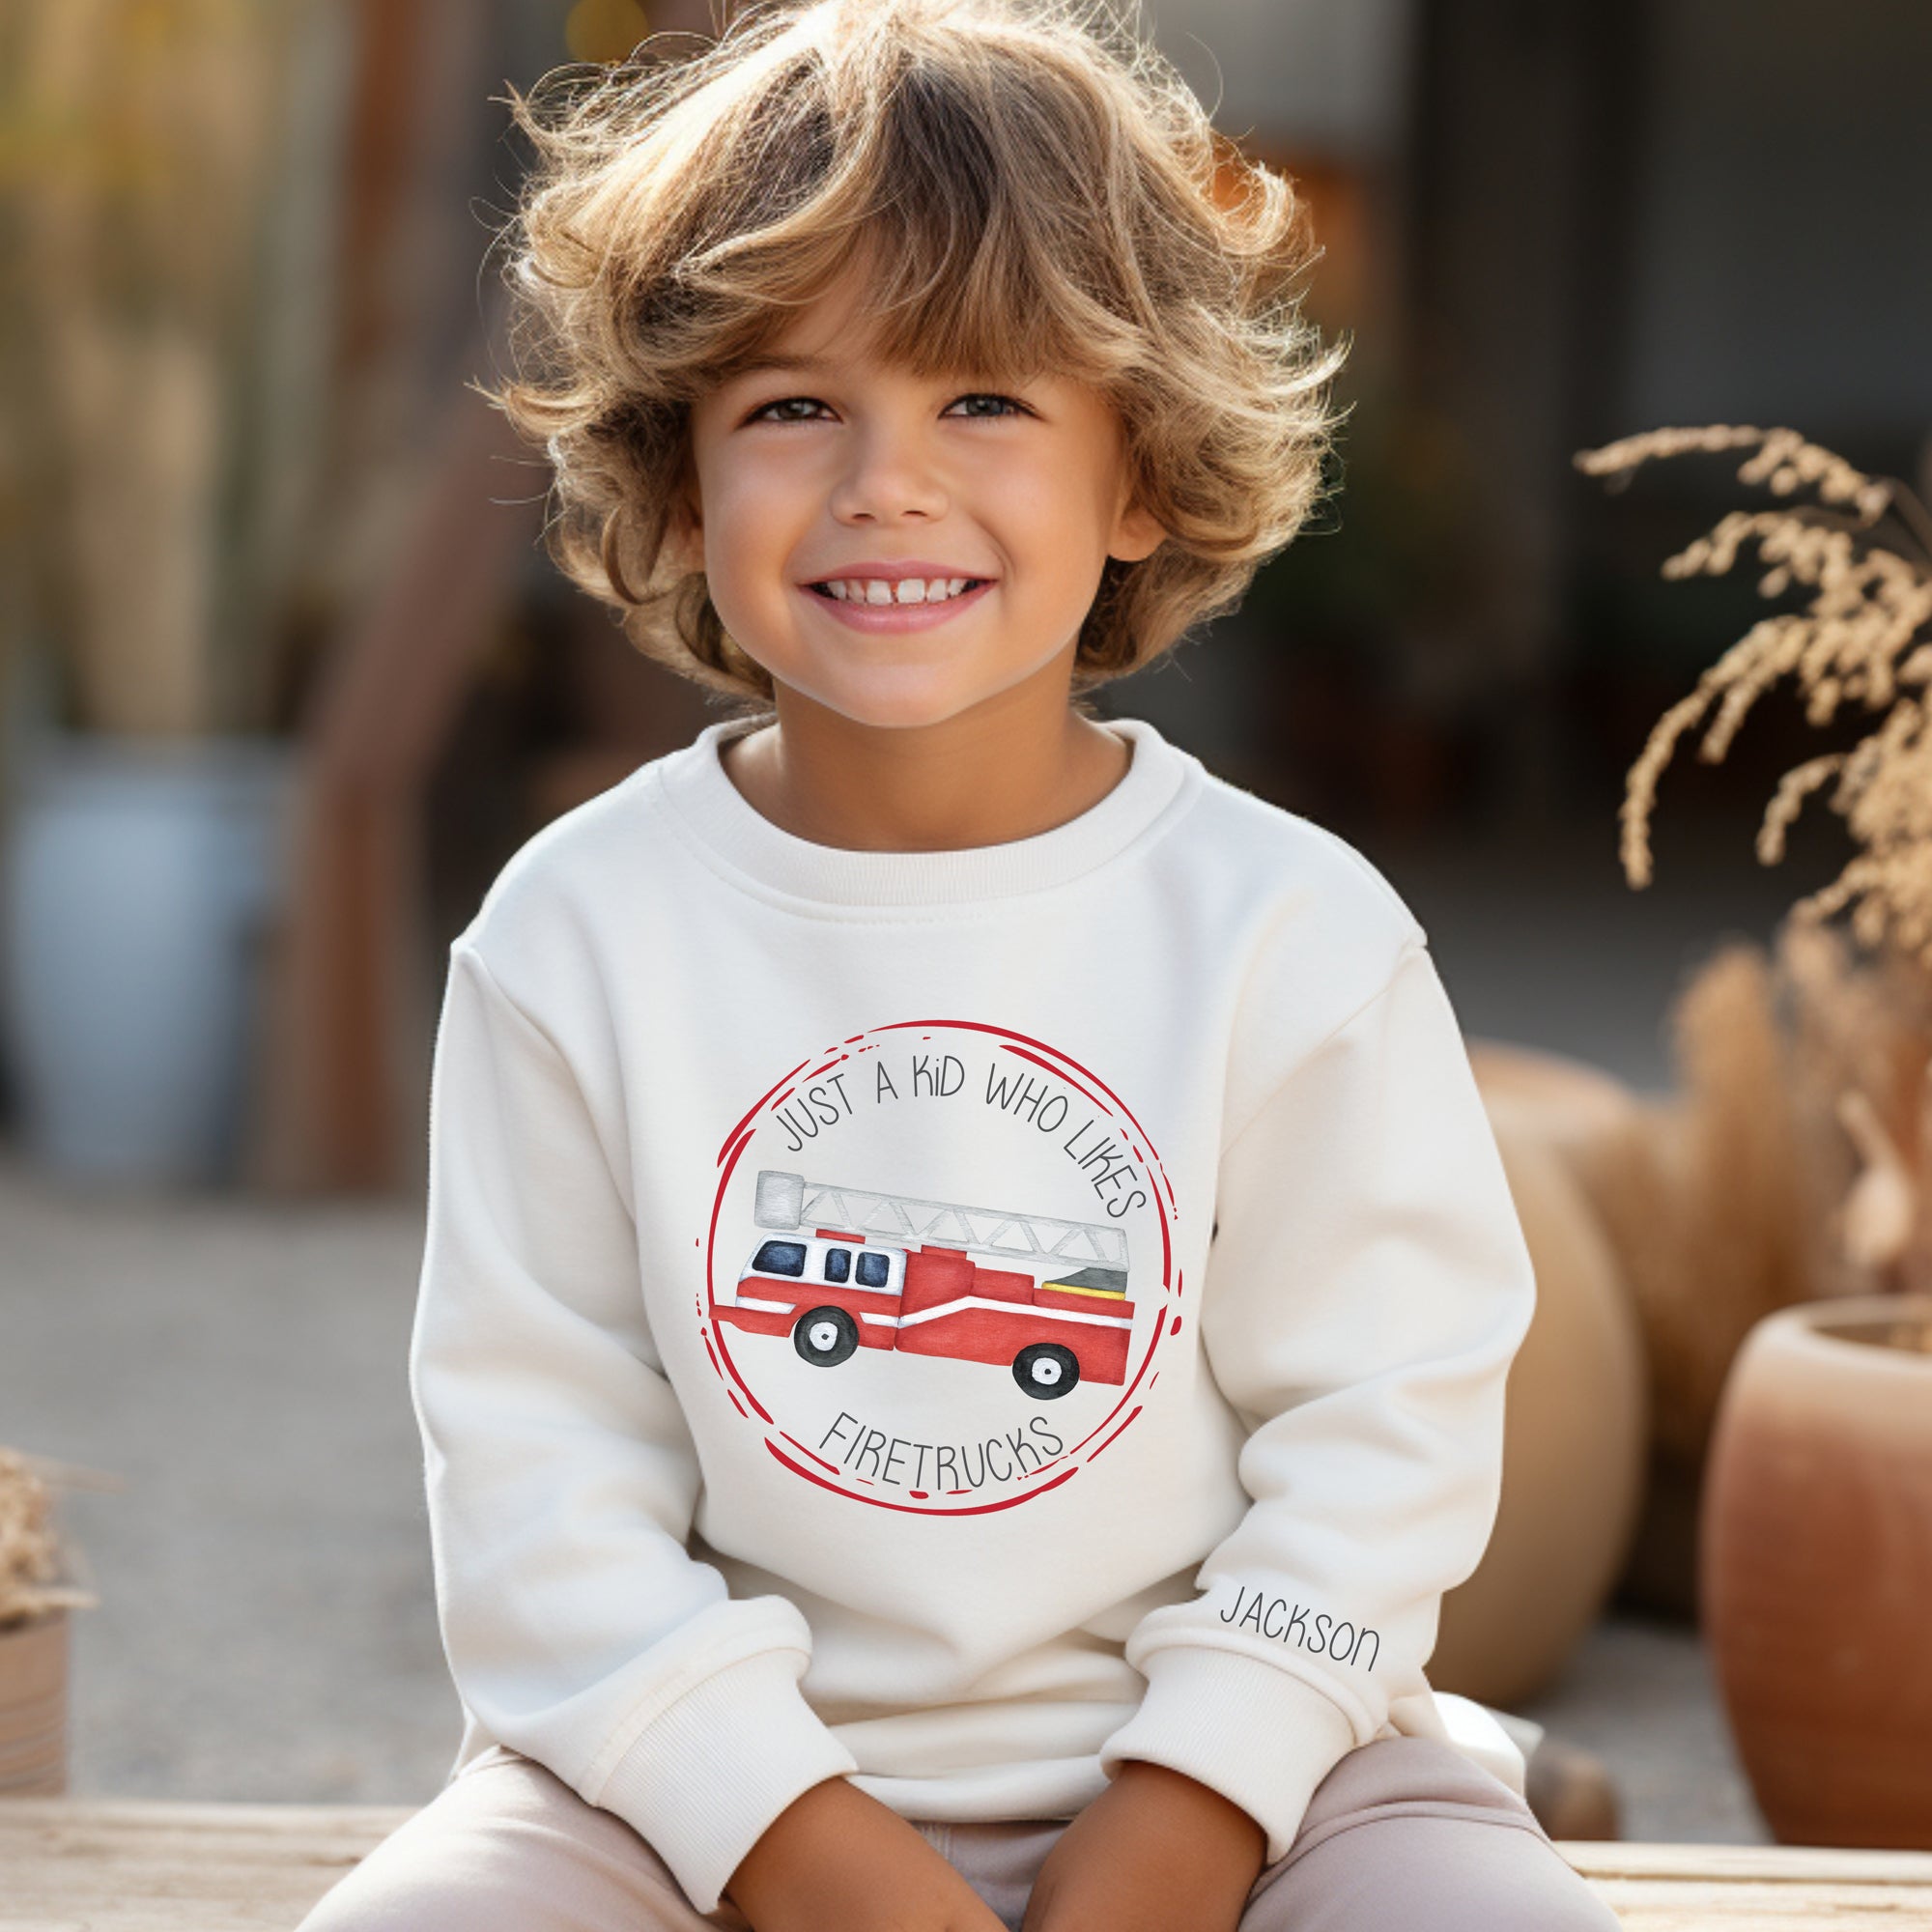 Just a Kid who likes FIRETRUCKS - Personalized Apparel